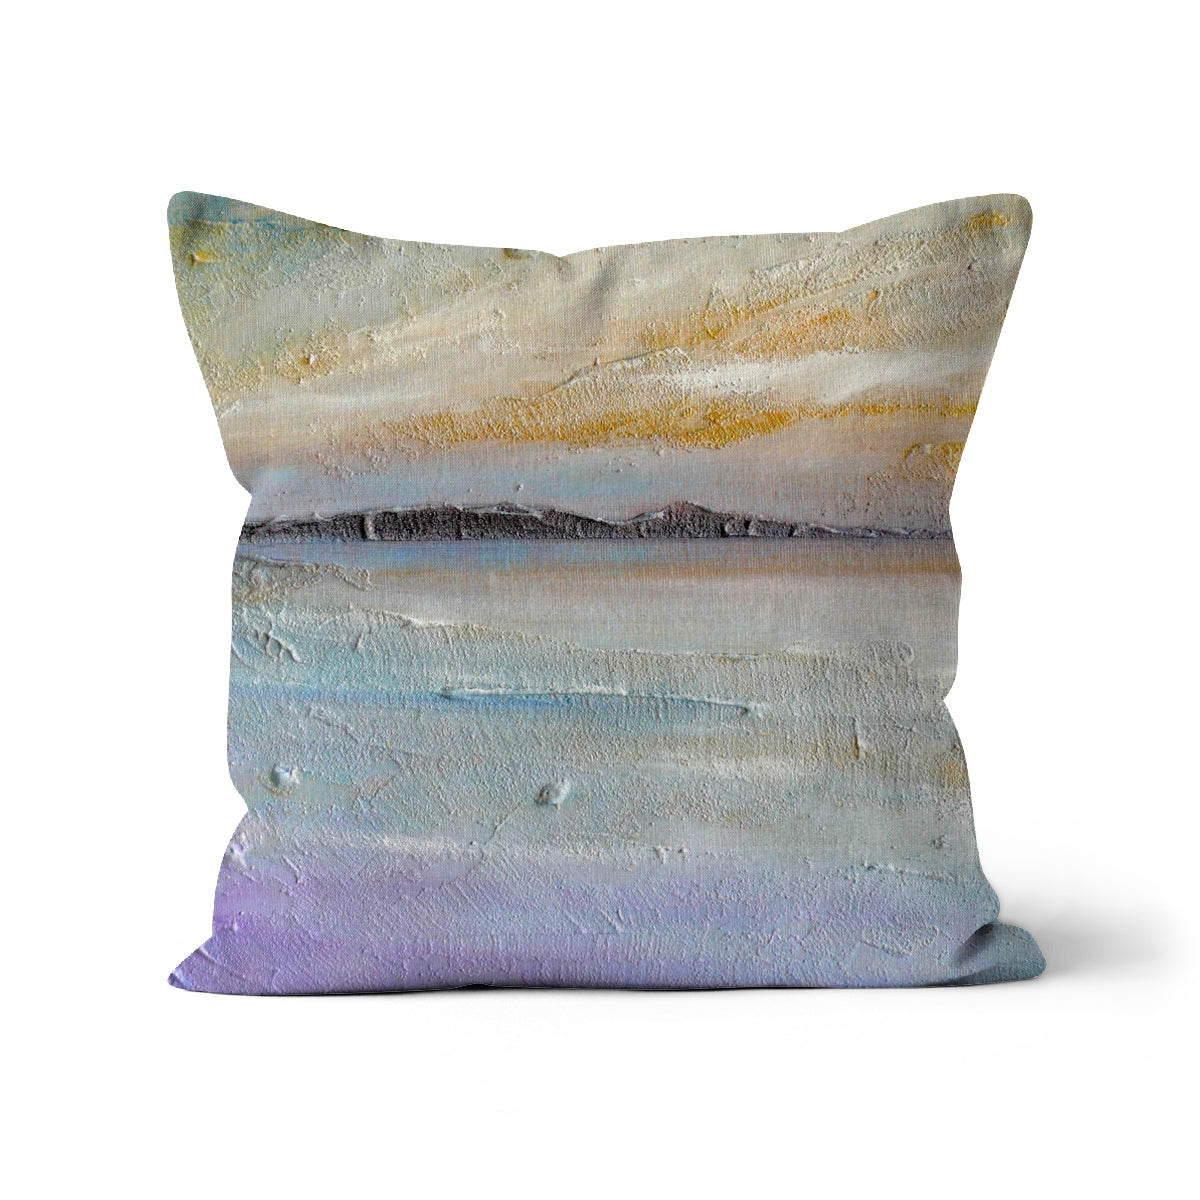 Sollas Beach South Uist Art Gifts Cushion-Cushions-Hebridean Islands Art Gallery-Faux Suede-24"x24"-Paintings, Prints, Homeware, Art Gifts From Scotland By Scottish Artist Kevin Hunter